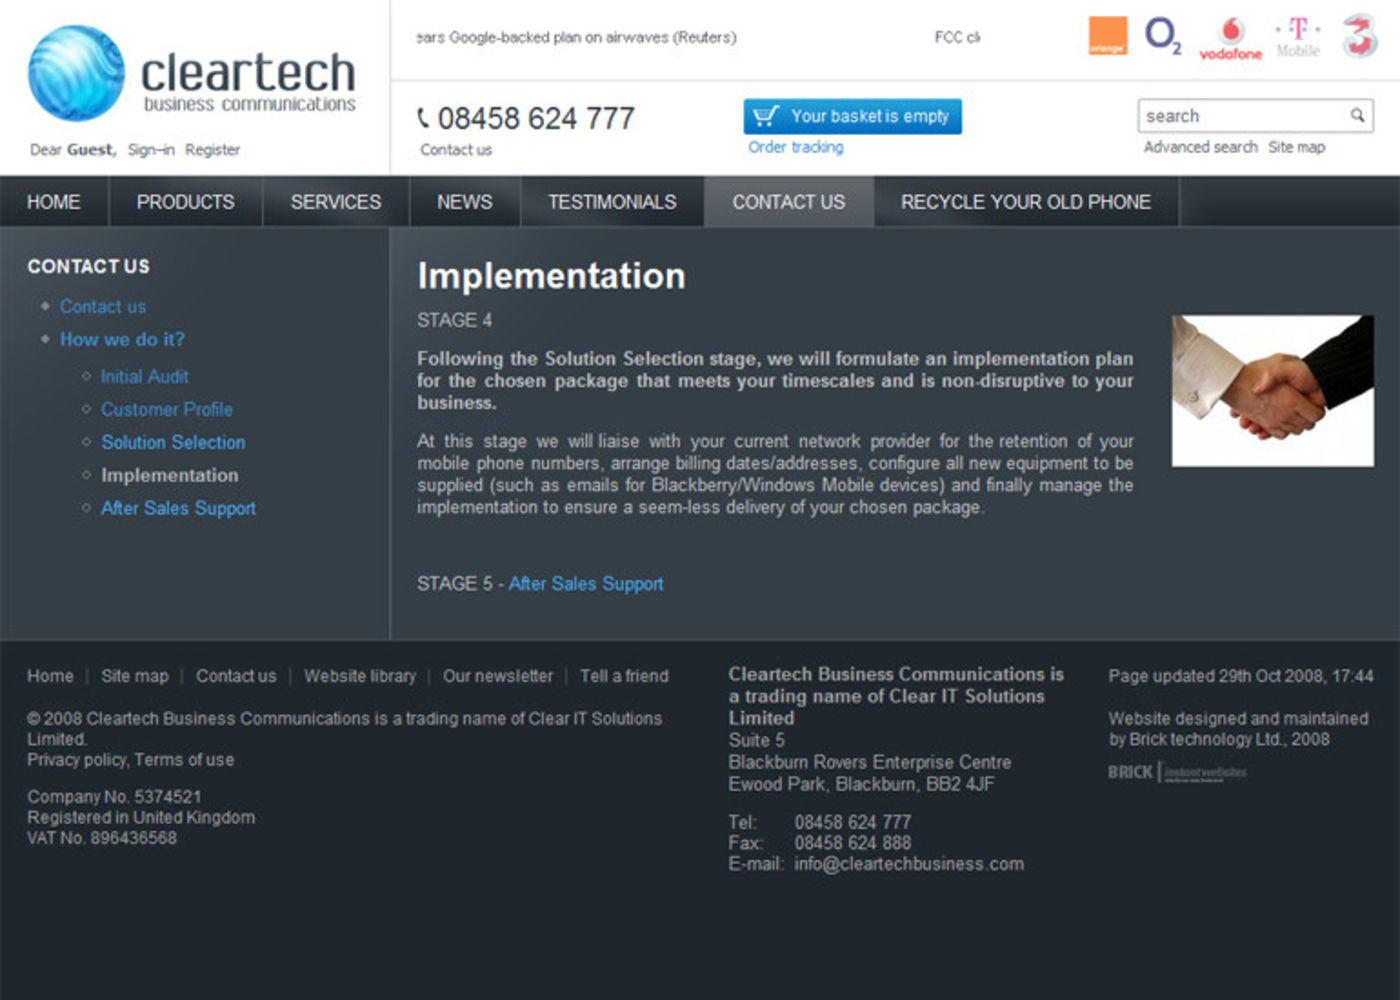 Cleartech Business Communications Regular page